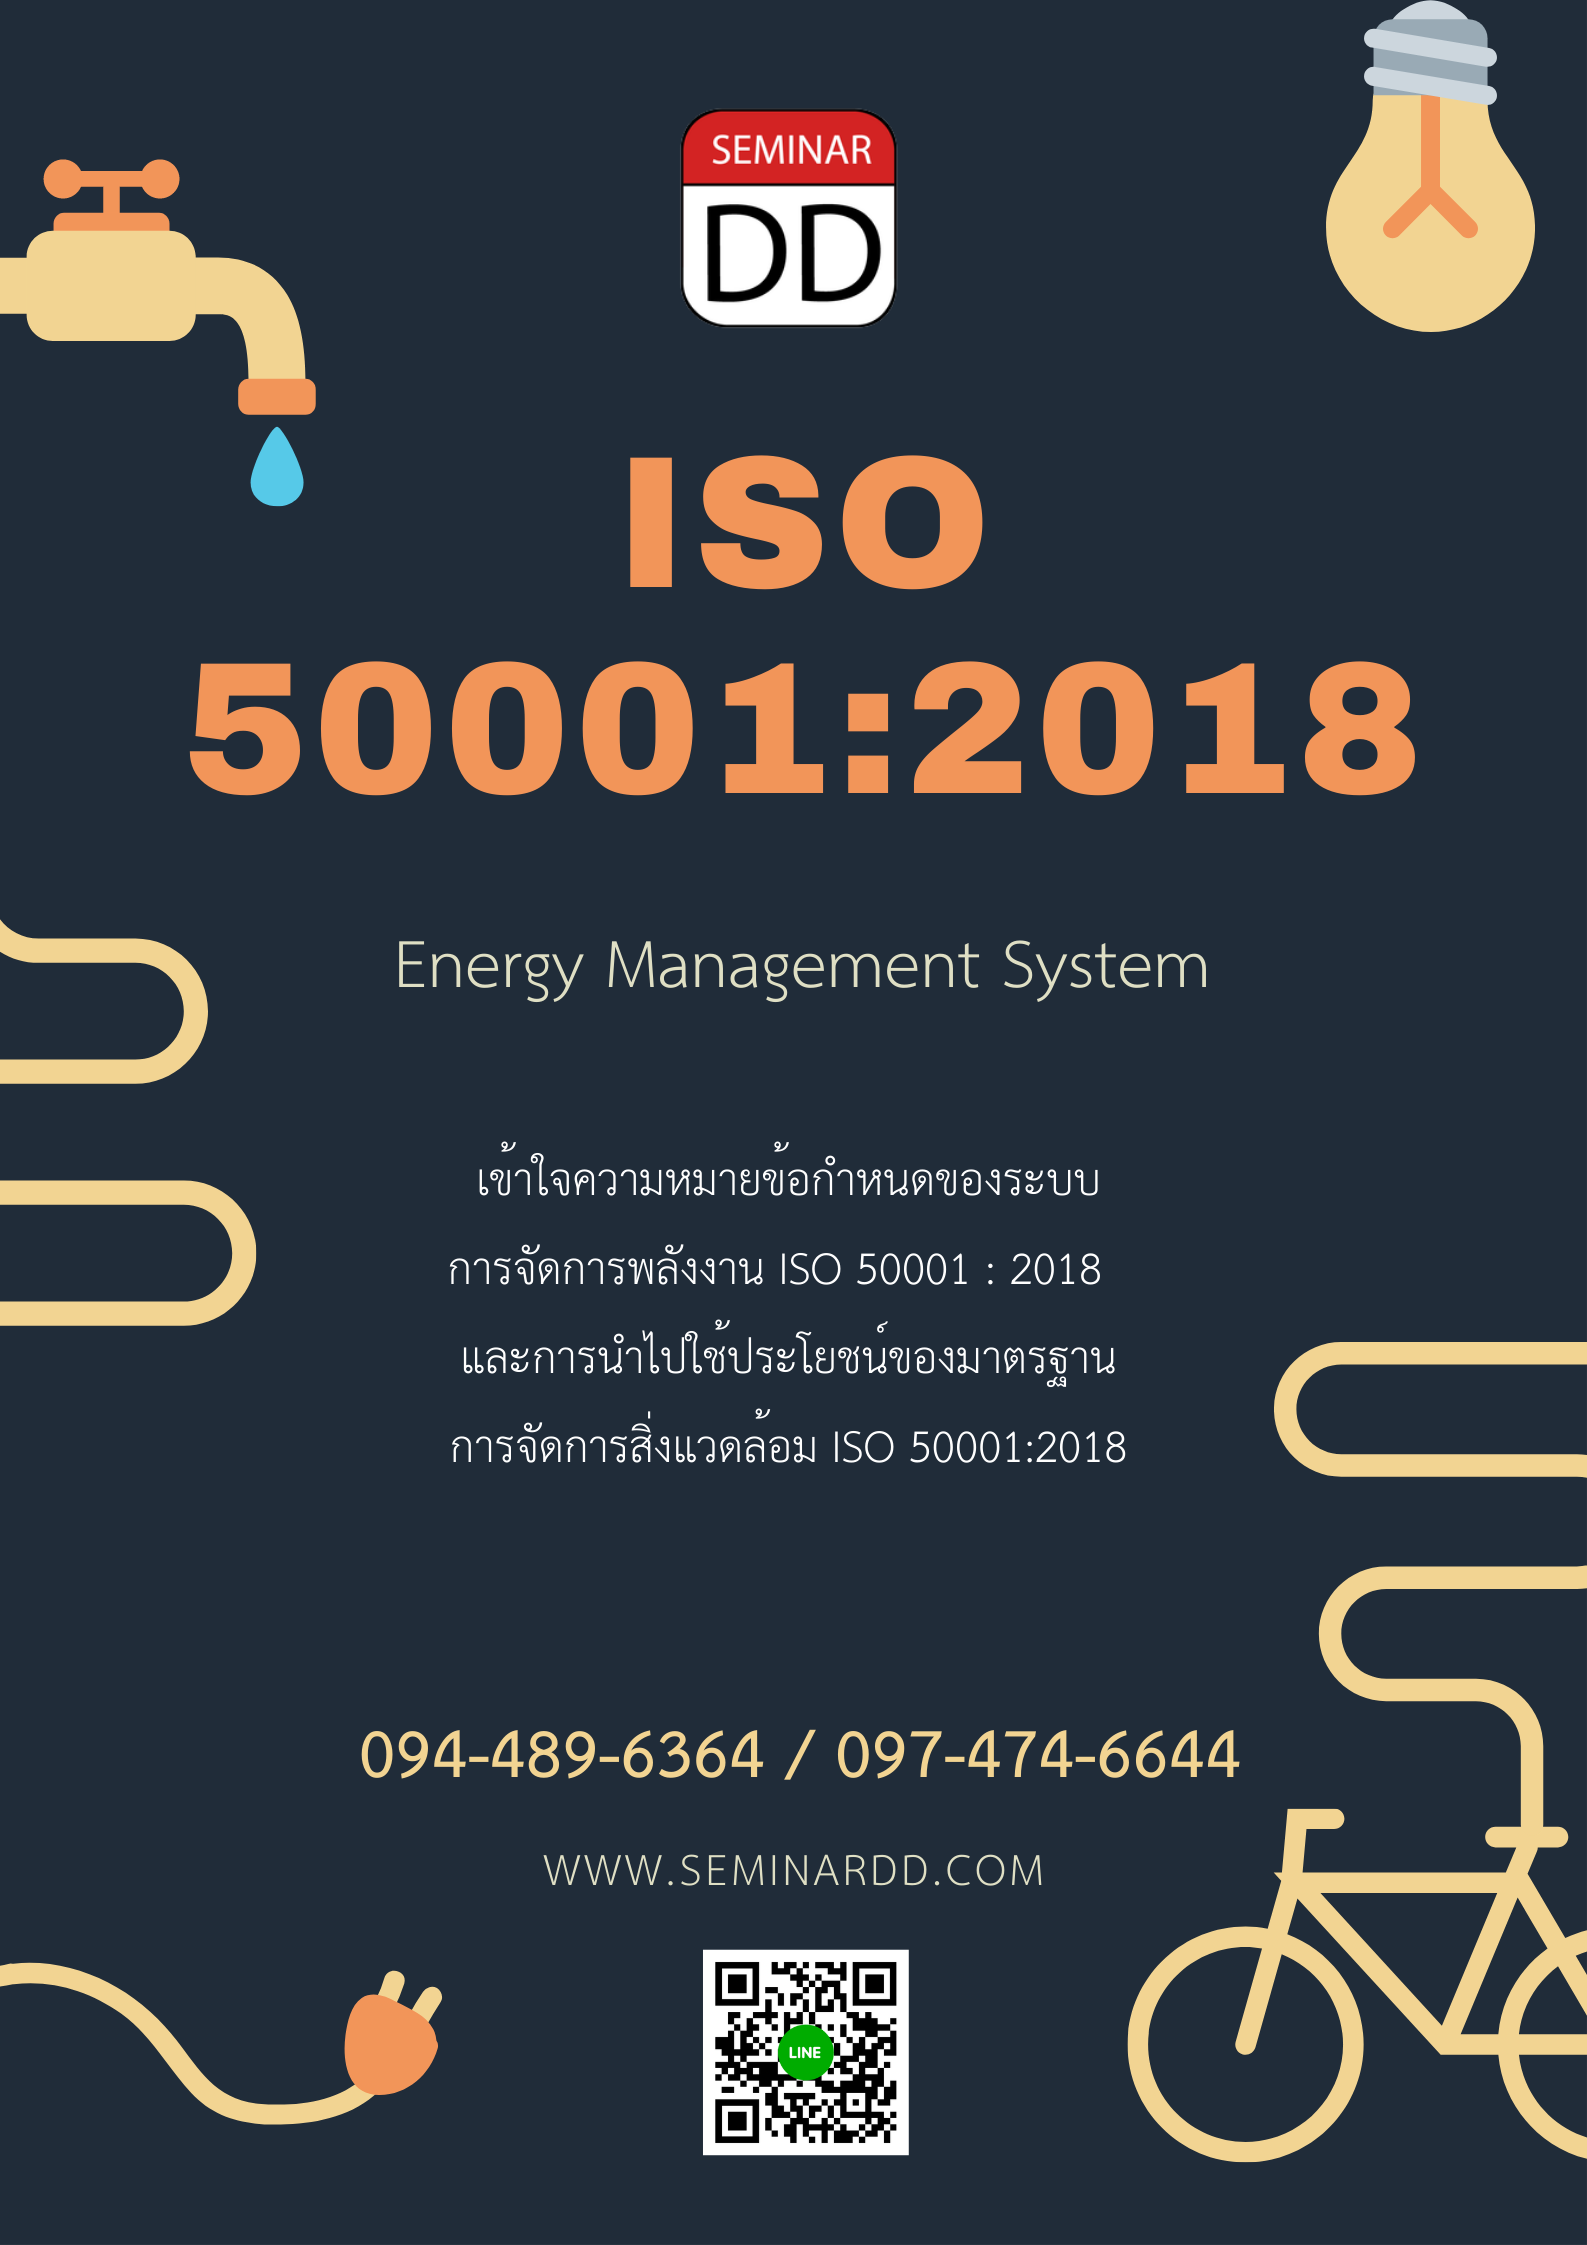 ISO 50001:2018 Energy Management System-Requirement